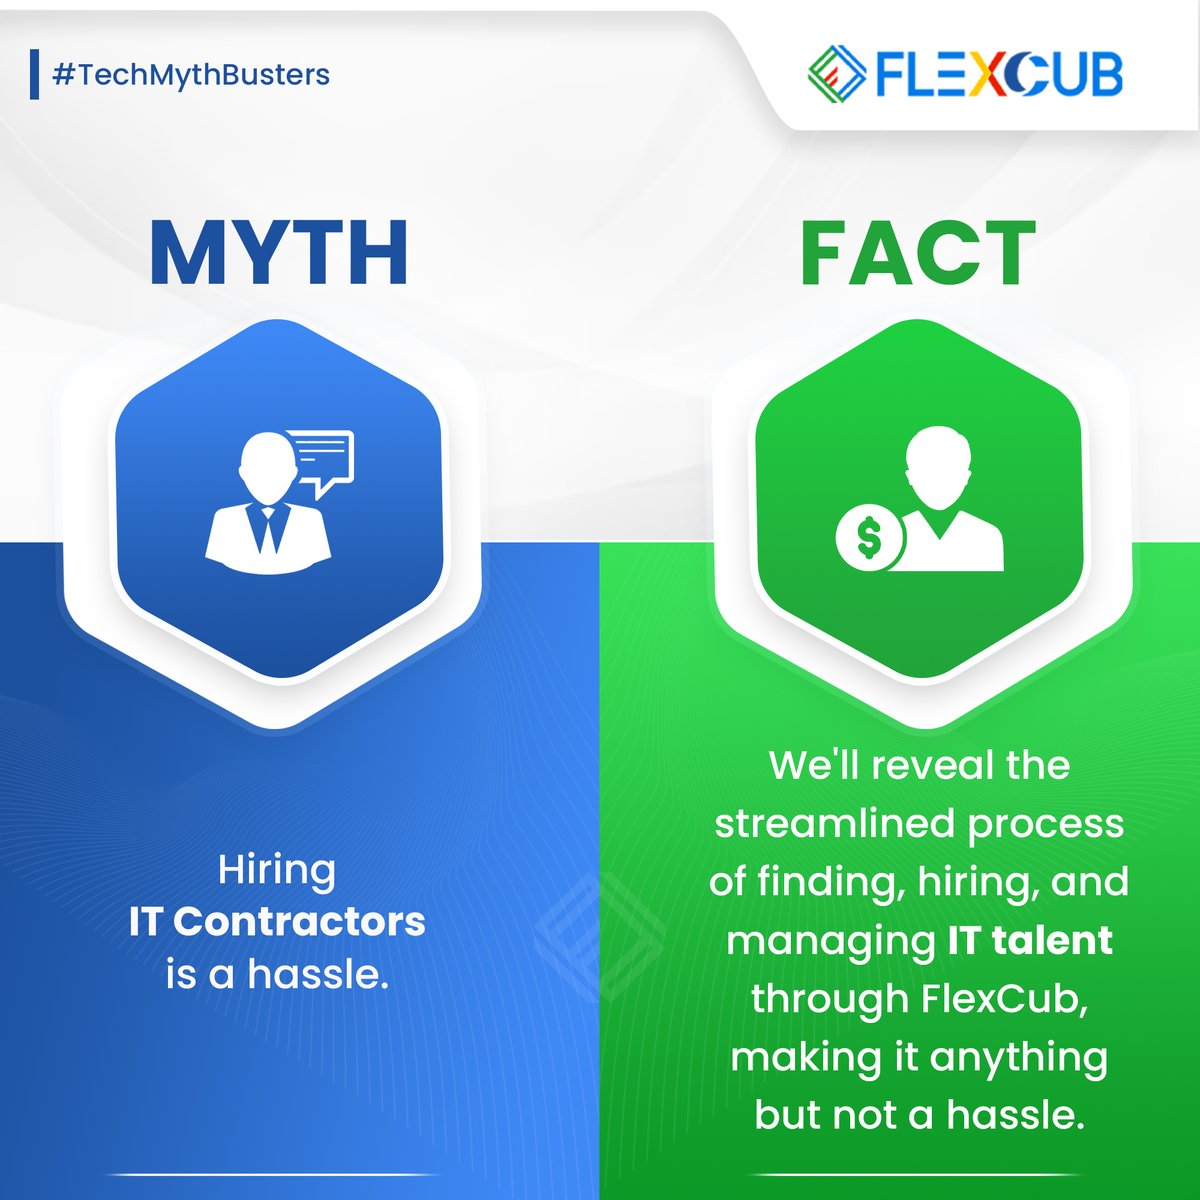 Unlock a new era in IT talent acquisition! Discover the effortless process of finding, hiring, and managing skilled professionals through FlexCub. 
To know more: bit.ly/44XU7ZA
#FlexCub #ITtalent #contractualhiring #myth #fact #ITContractor #TechMythBusters